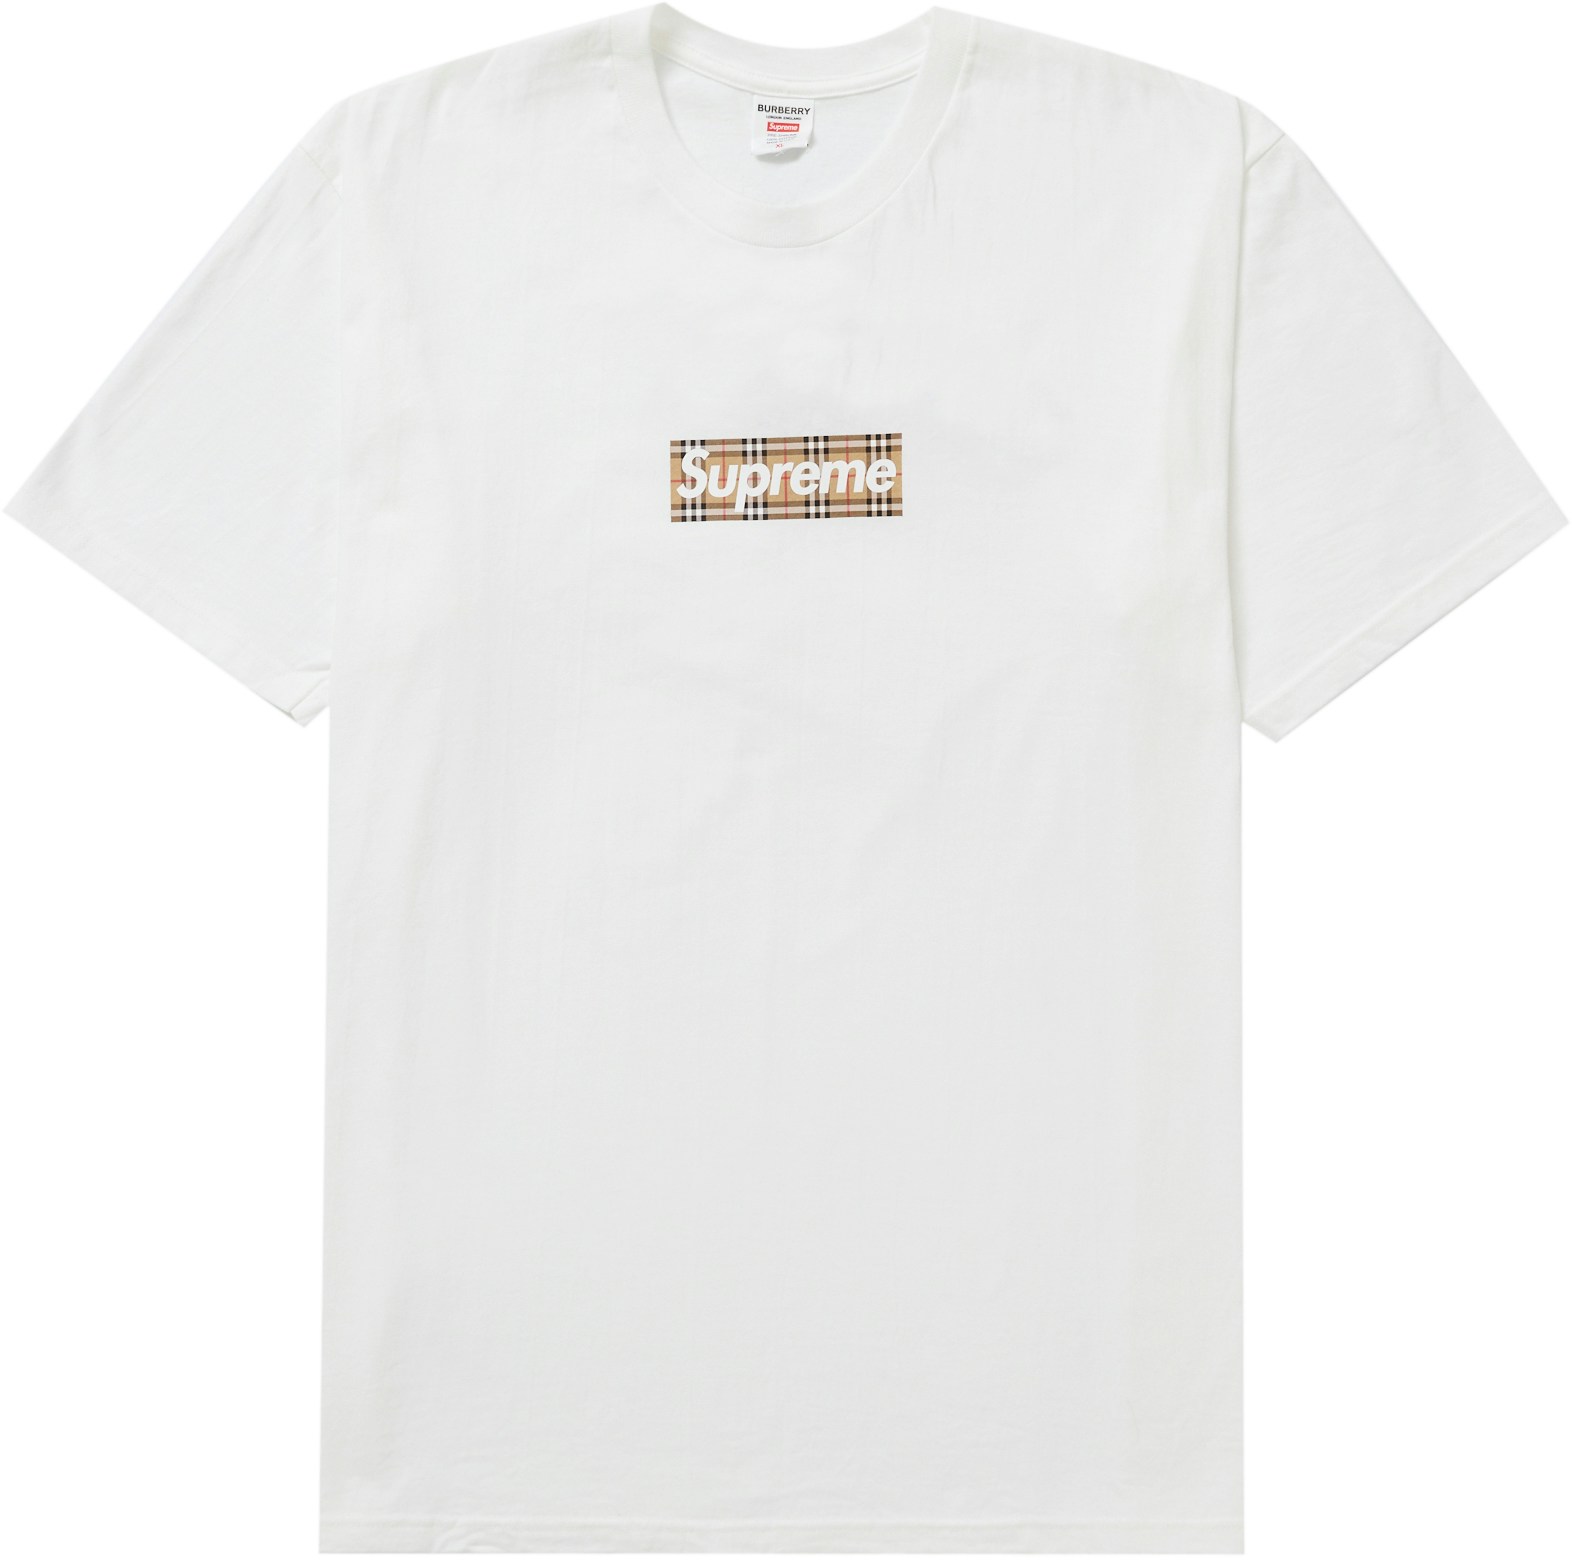 Buy and Sell 100% authentic Supreme Apparel - Novelship